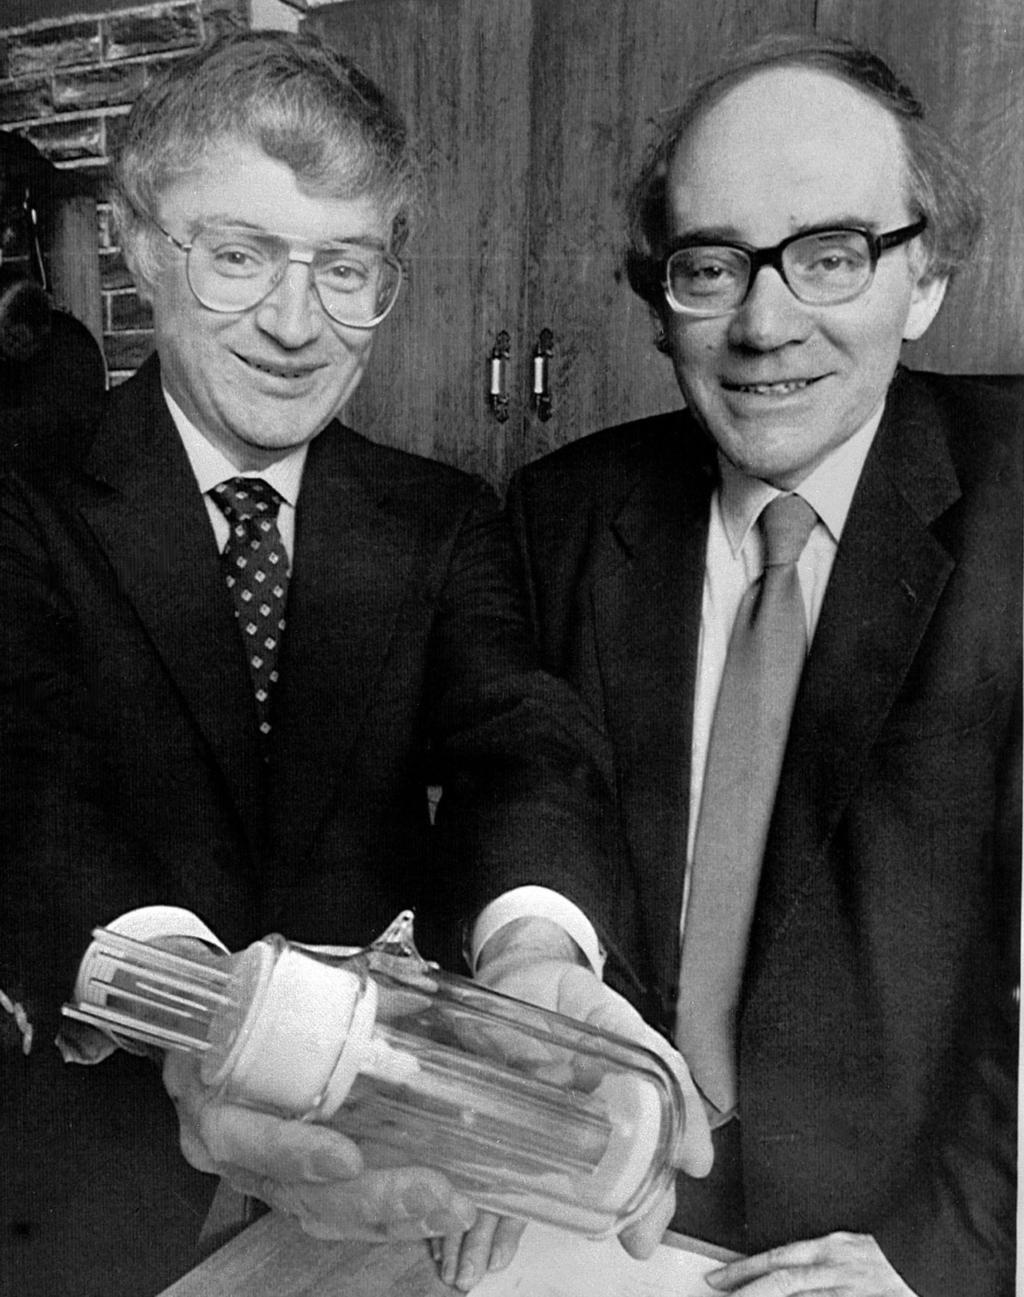 LENR background March 1989 - Prof Pons and Fleishman announce excess heat in electrochemistry experiments.